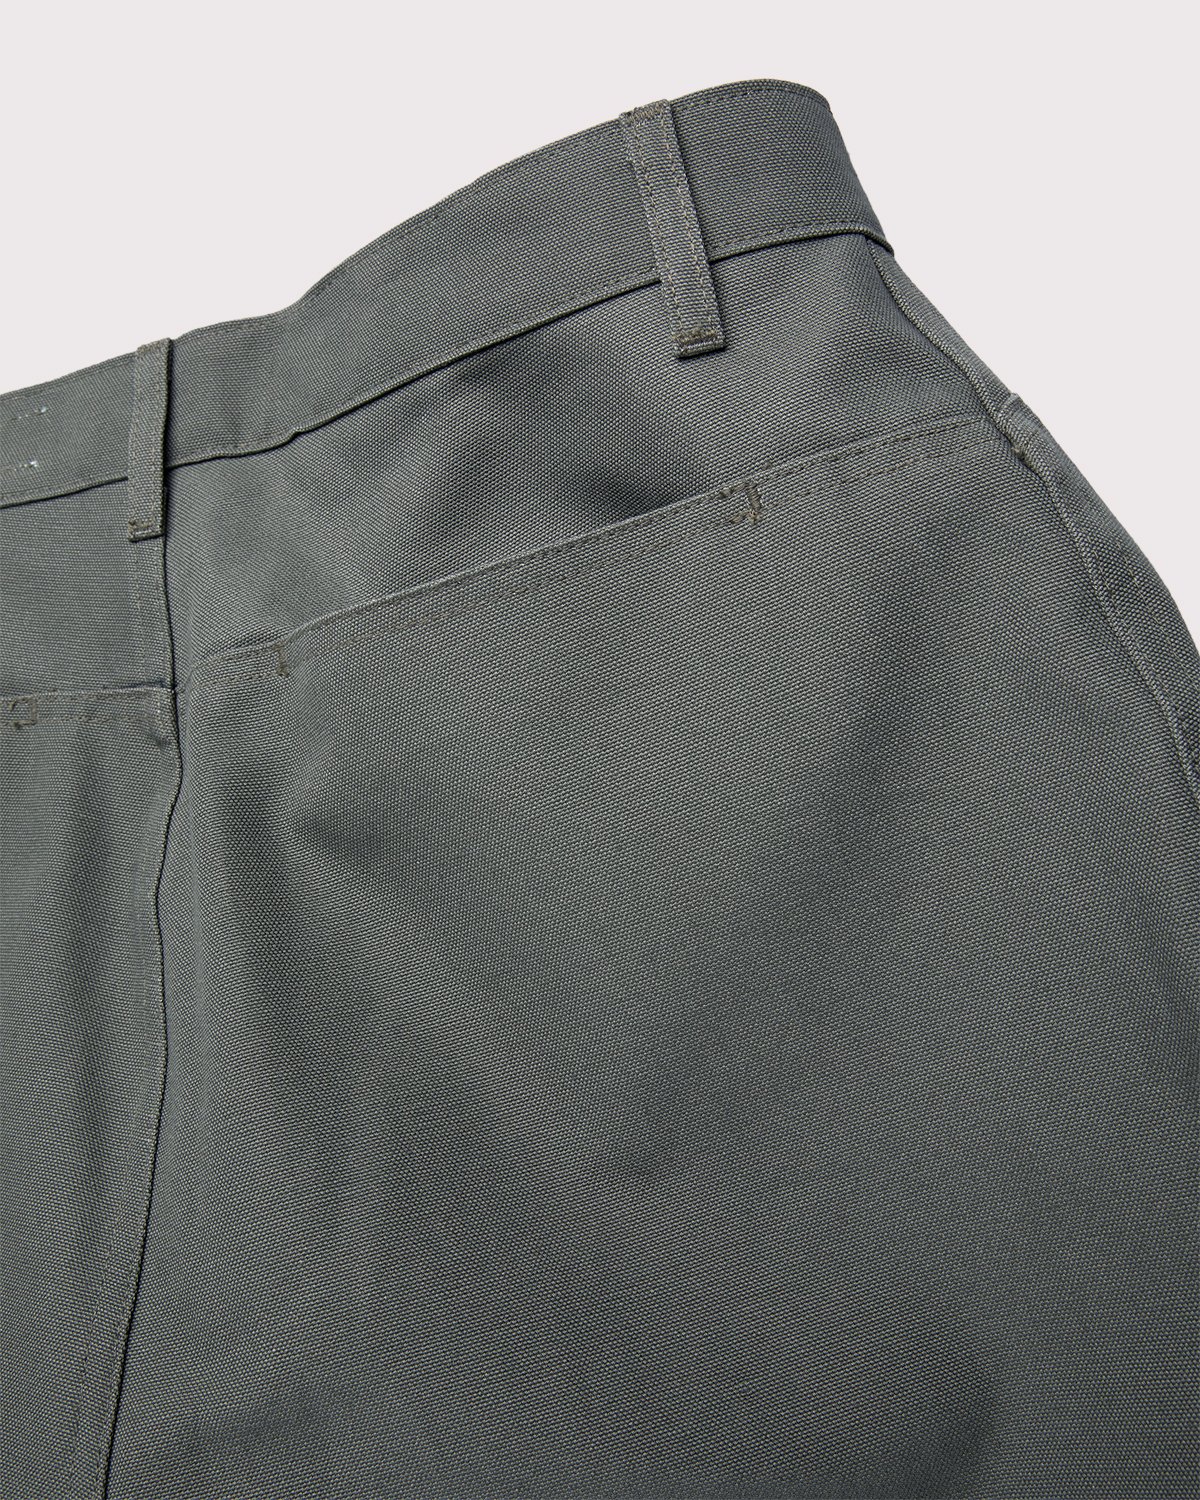 Darryl Brown - Japanese Cargo Pants Military Olive - Clothing - Green - Image 4